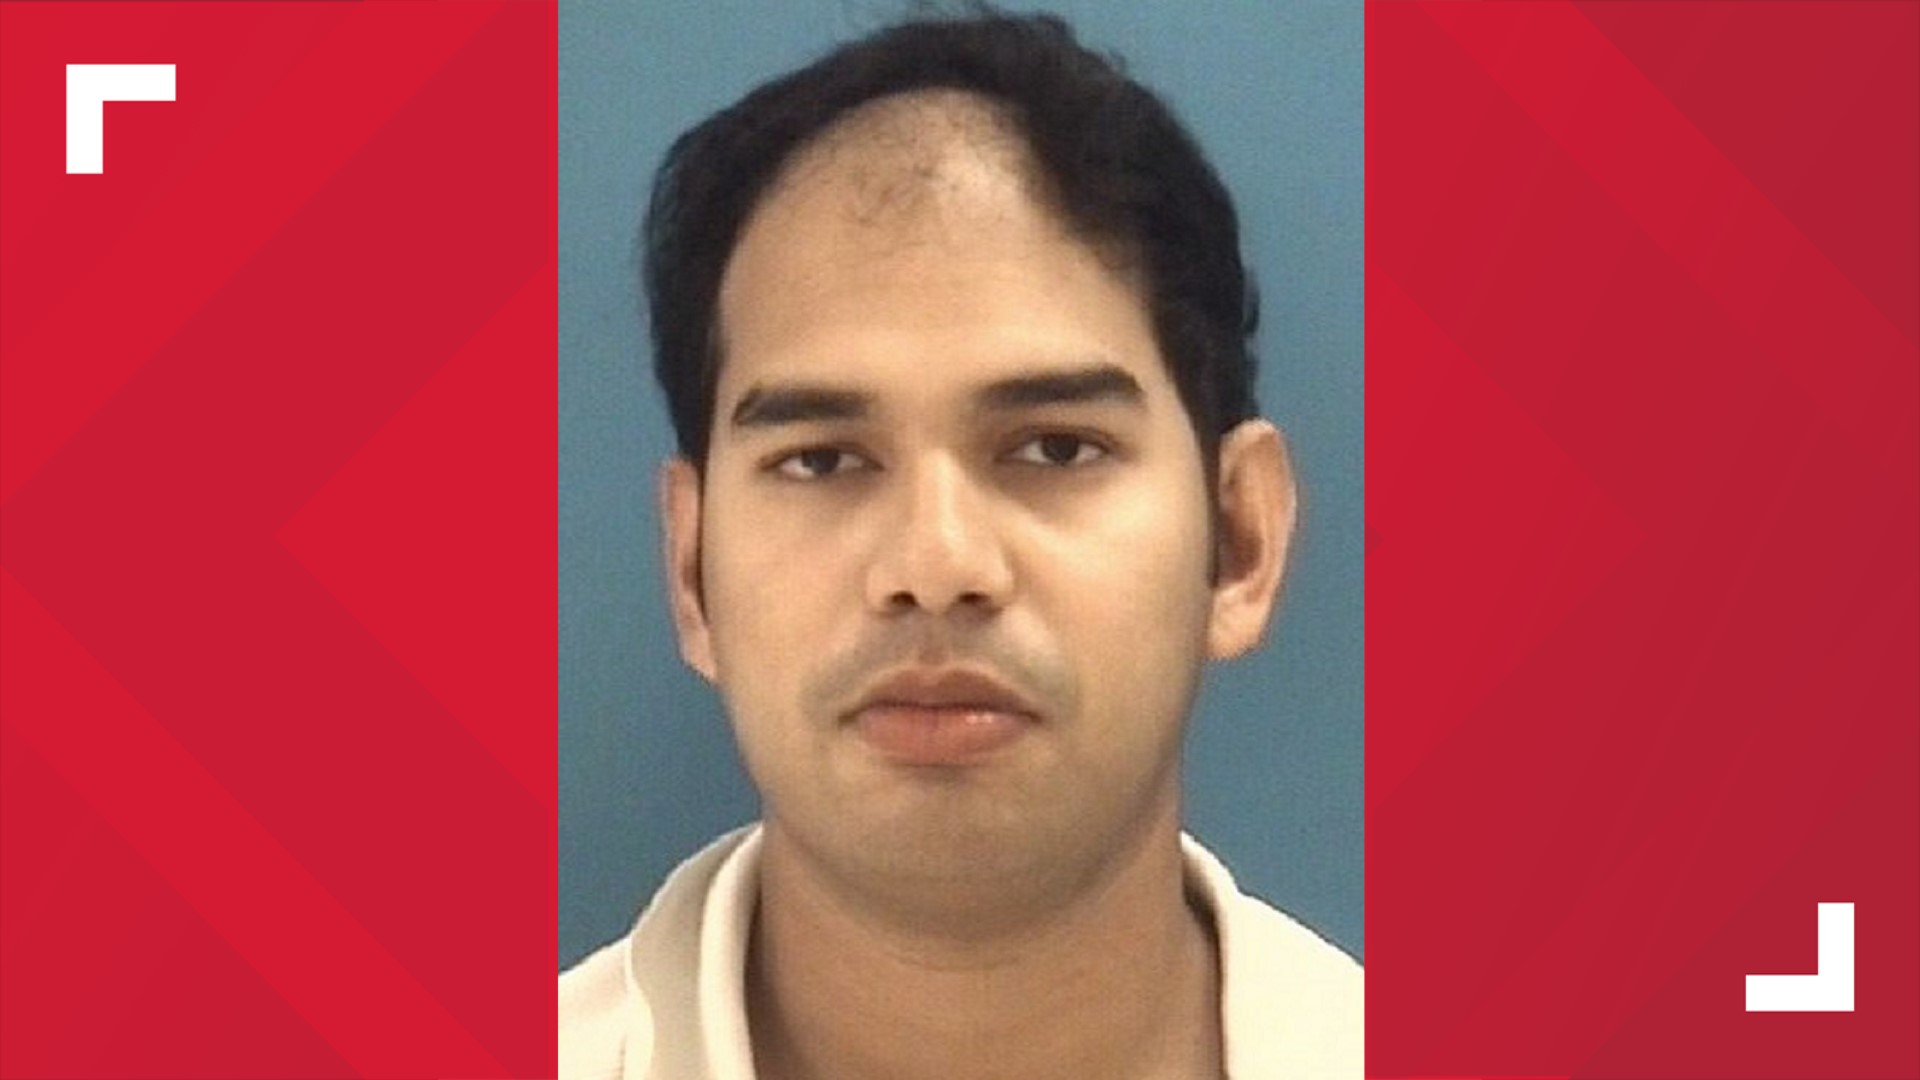 Shiam Sunder Shankara Subramanian was accused of leaving the scene of an crash resulting in death and passing school bus when arm signal is extended causing death.